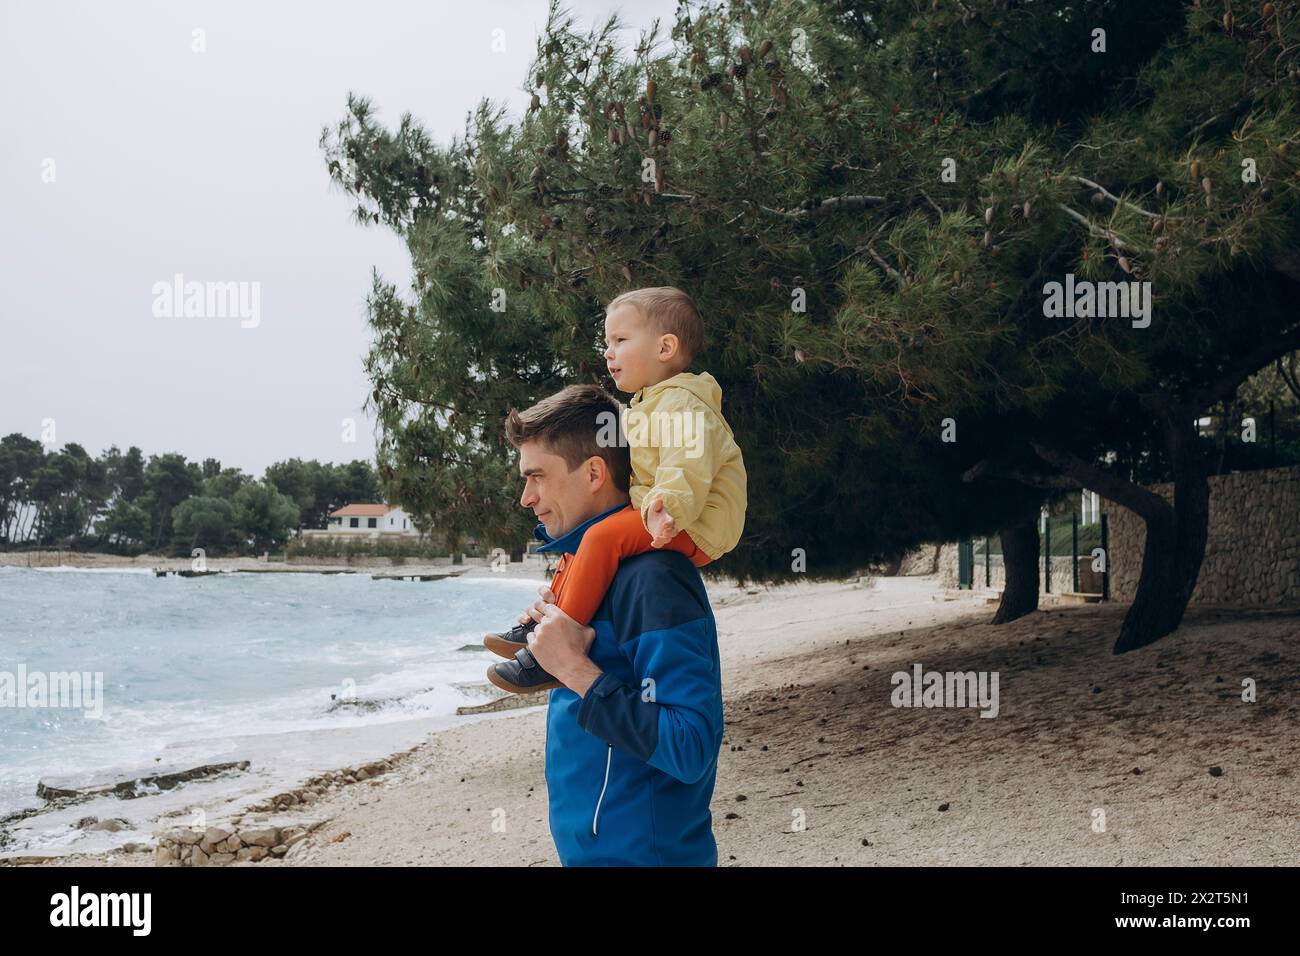 Father carrying son on shoulders at beach Banque D'Images